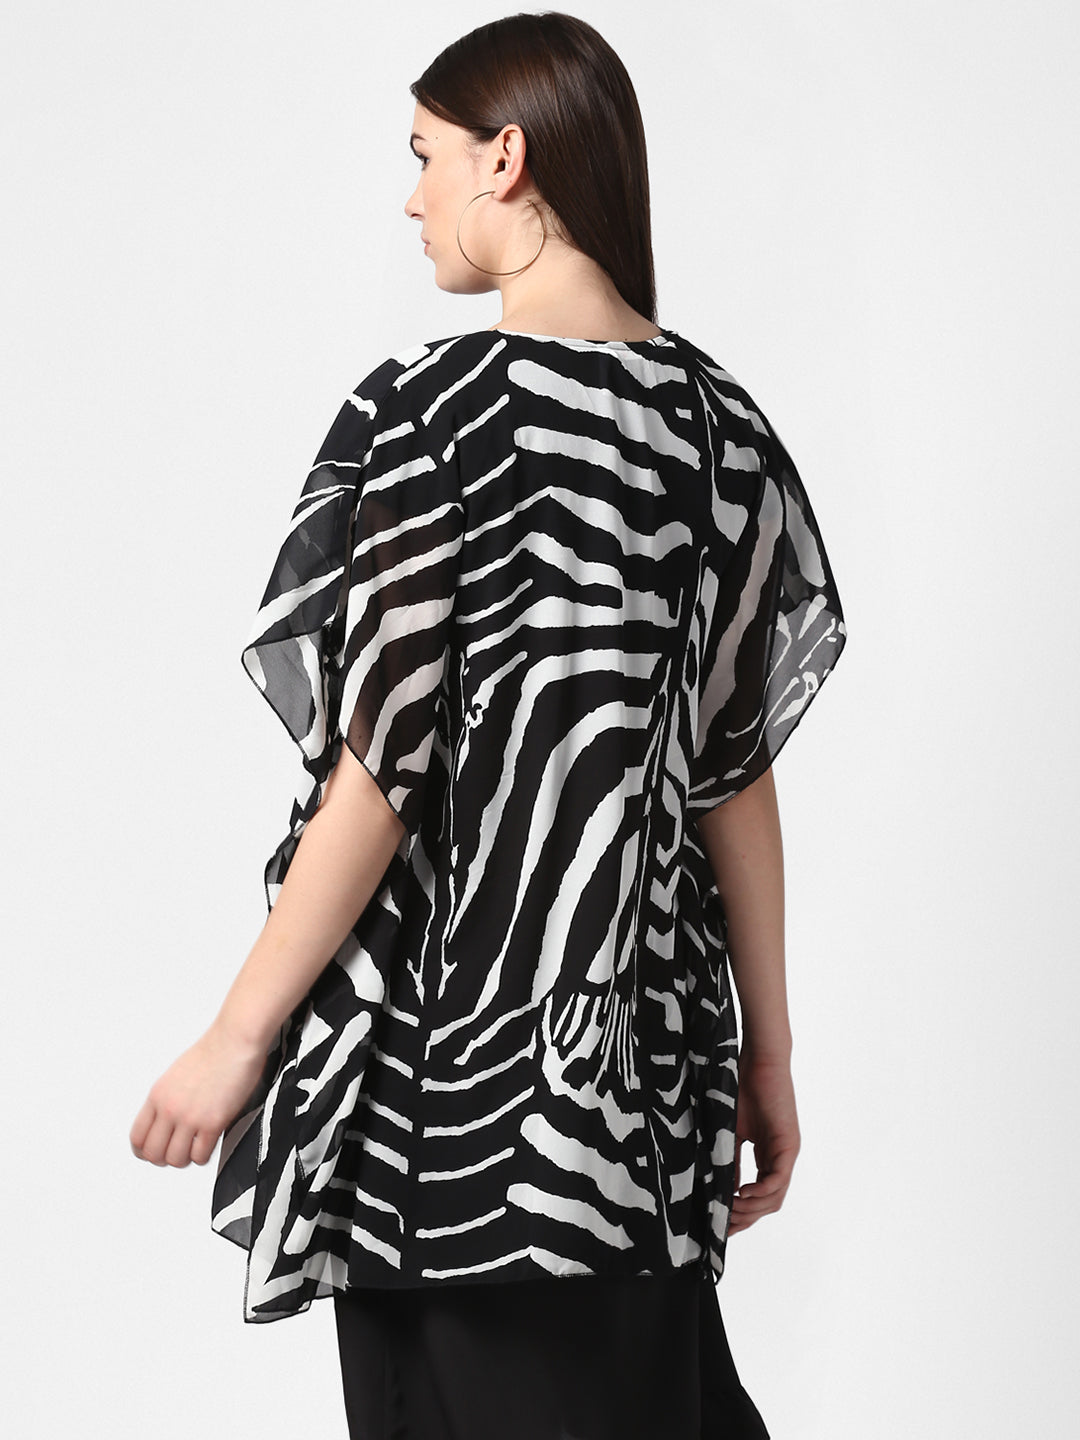 Women's Black and White Georgette Printed Open Shrug